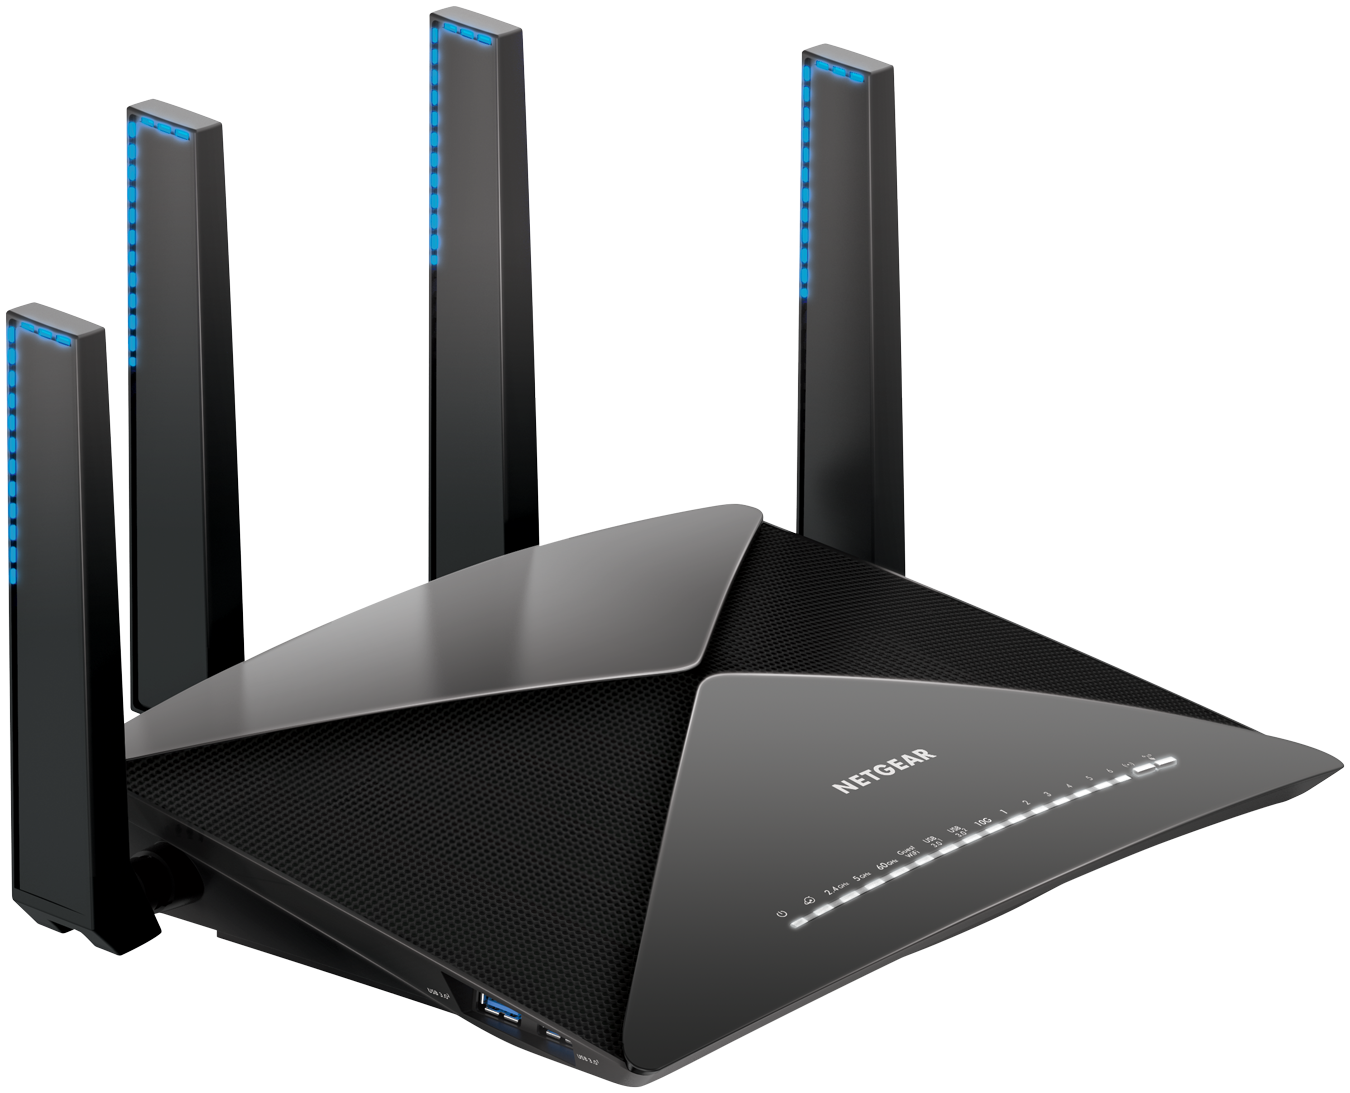 NETGEAR Nighthawk X10 – AD7200 802.11ac/ad WiFi Router with 1.7GHz Quad-core Processor (R9000) - image 2 of 6